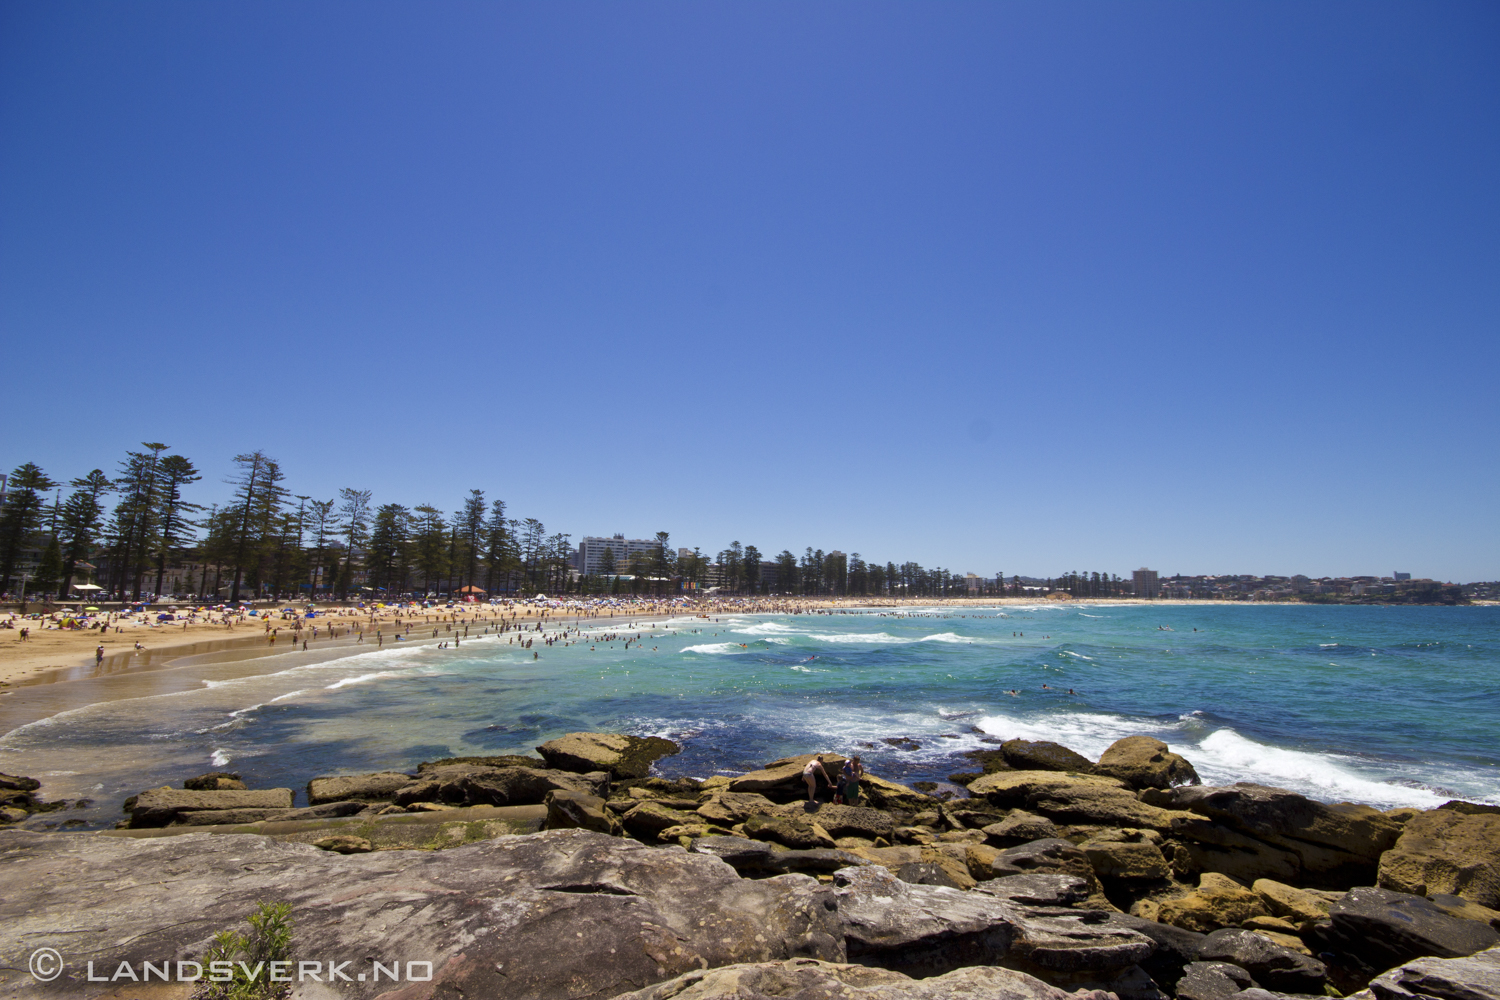 Manly, Sydney, New South Wales. 

(Canon EOS 550D / Sigma 10-20mm F3.5)